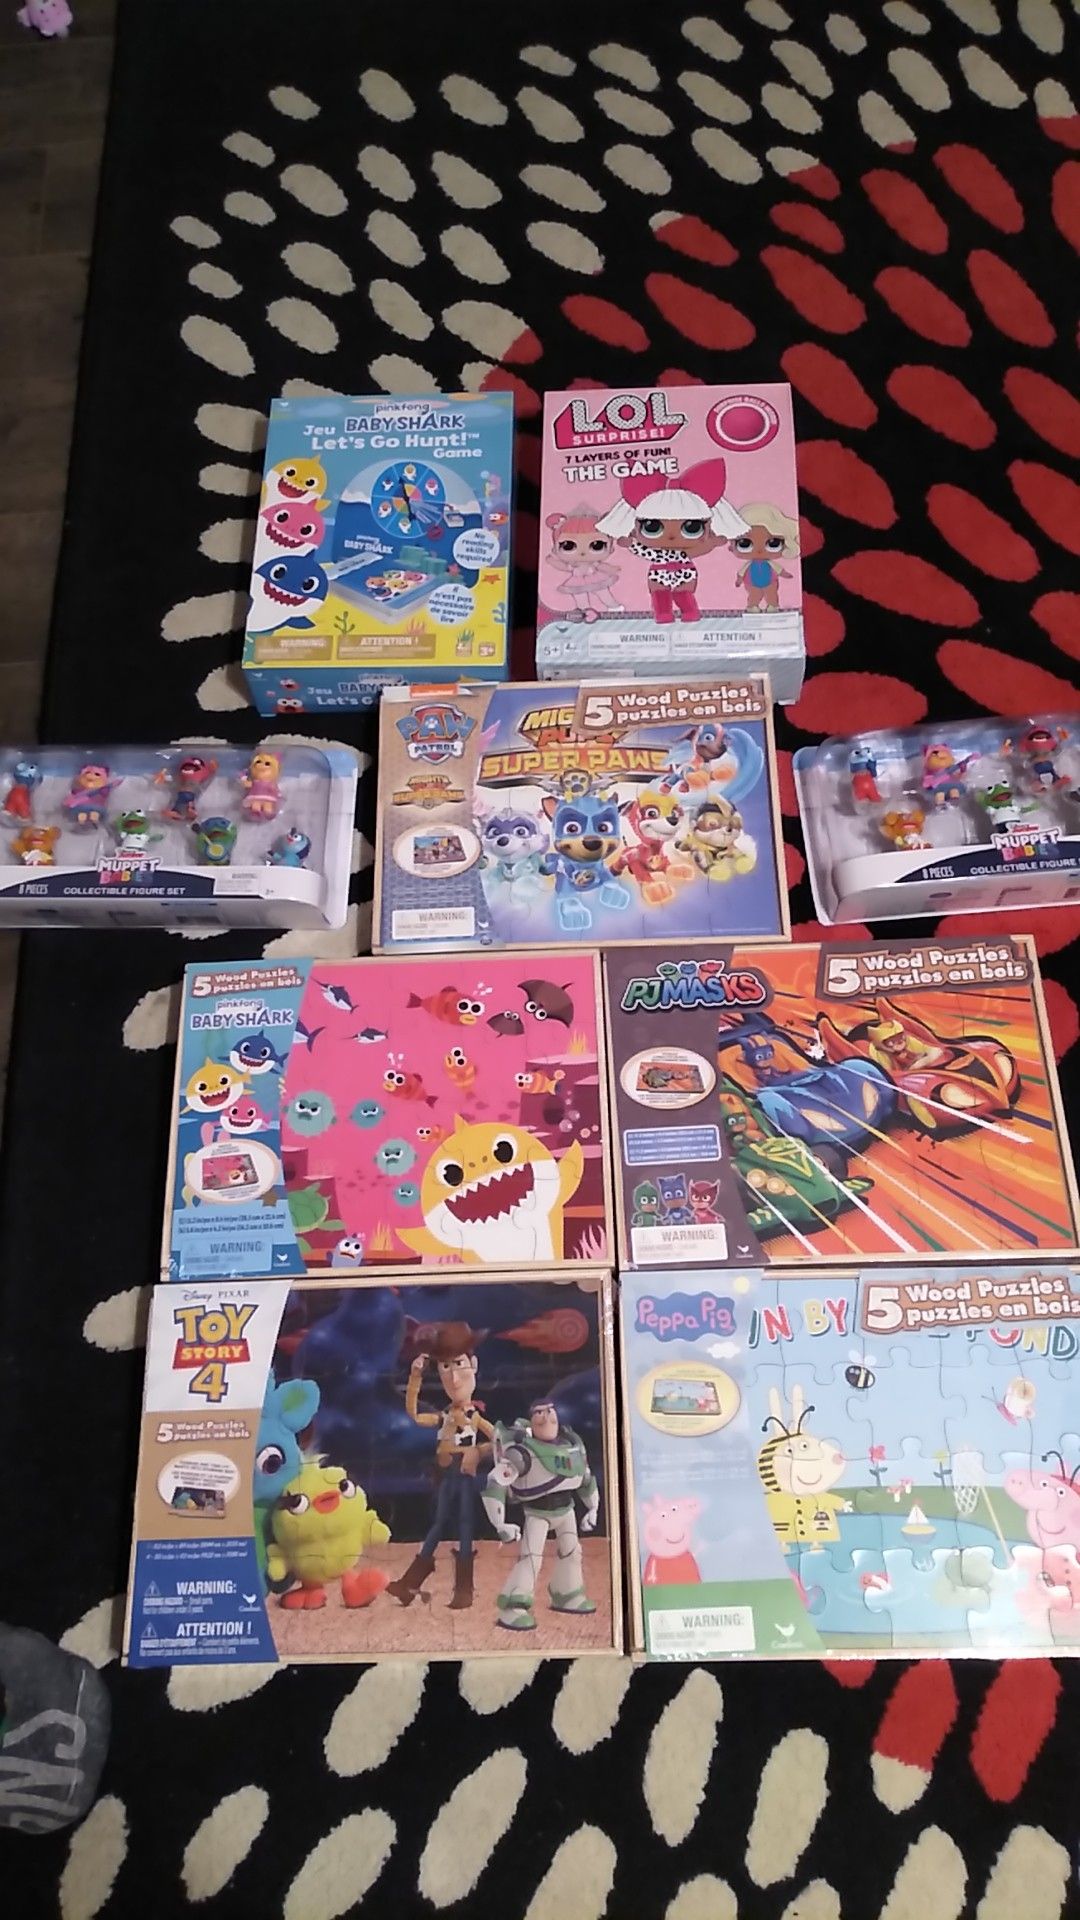 Muppet babies figures, wooden puzzles, and games